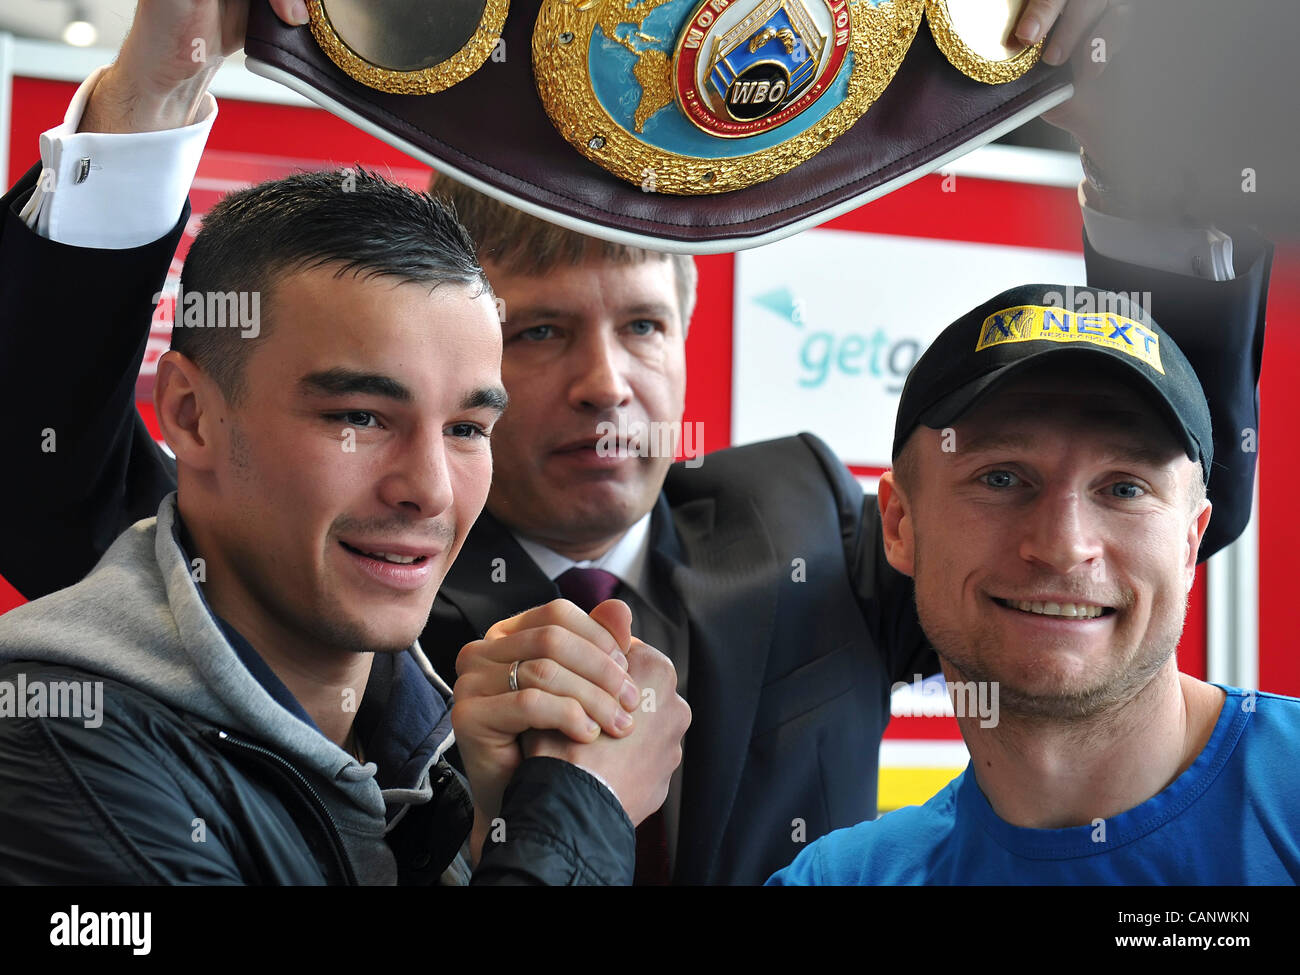 Boxers Lukas Konecny from the Czech Republic (right) and Salim Labria (FRA) ahead of Interim WBO Jr. Middleweight Championship Title Bou during press conference in Brno, Czech Republic on March 2, 2012. (CTK Photo/Igor Sefr) Stock Photo